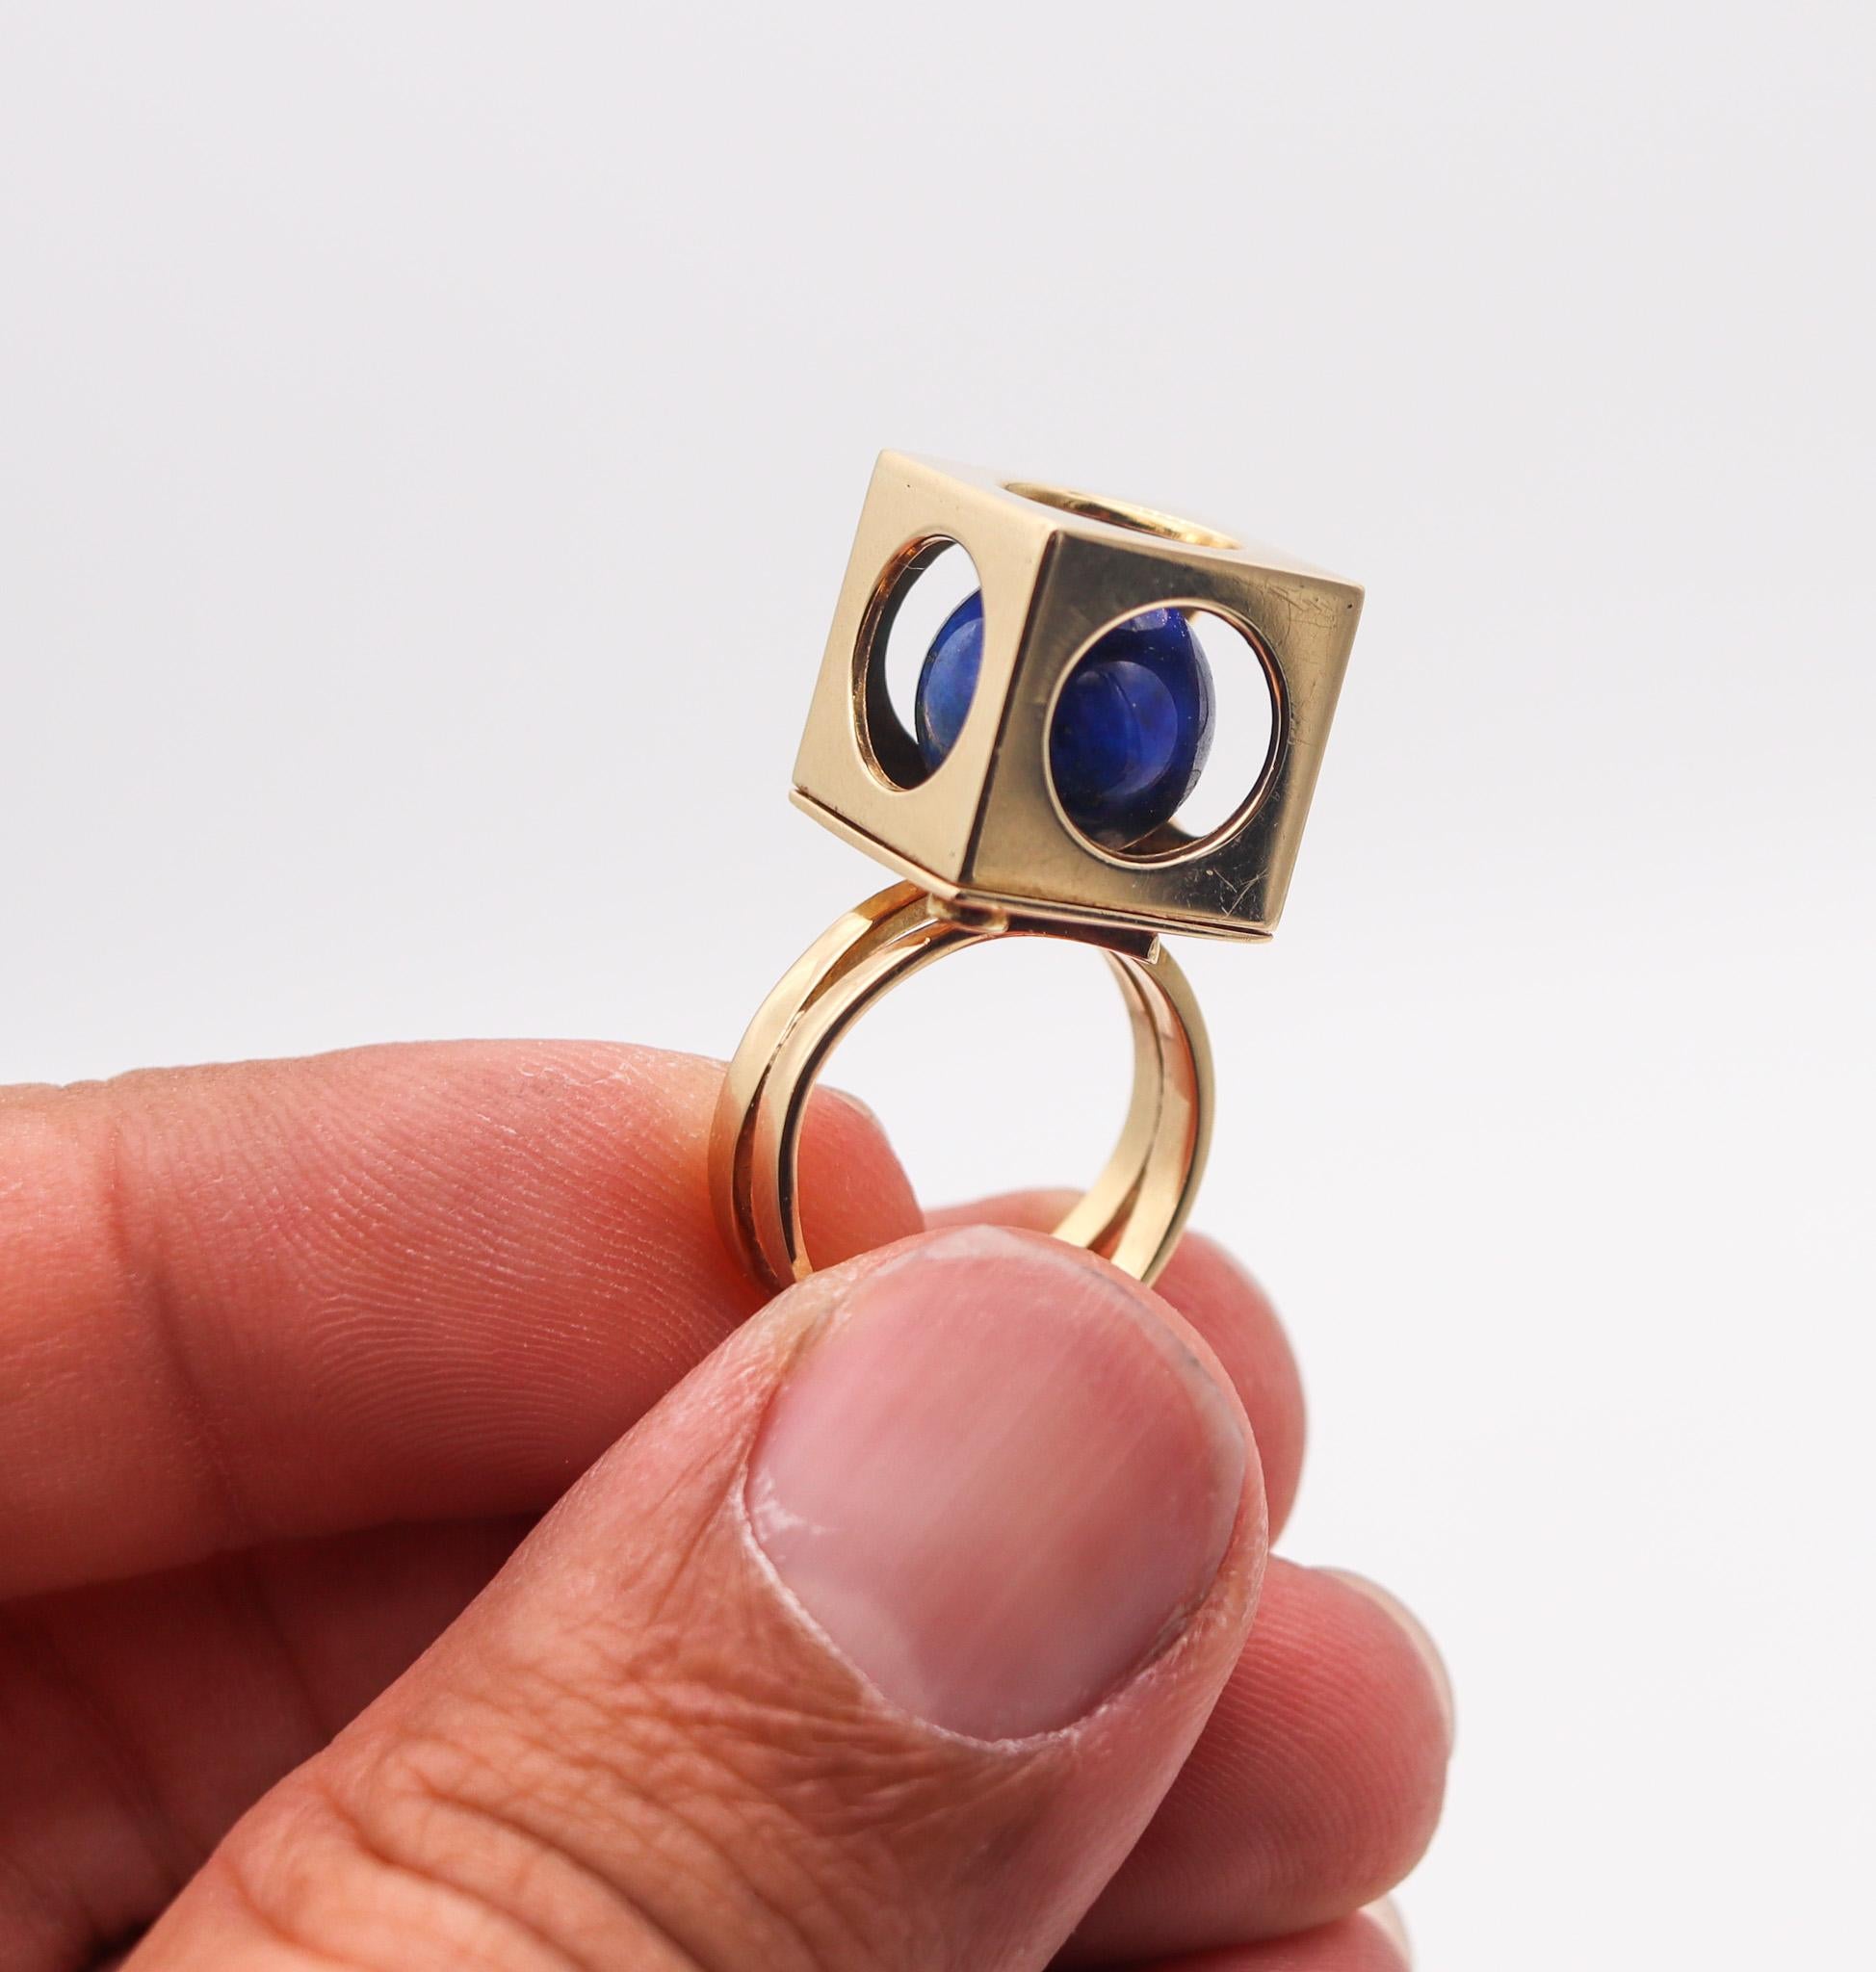 Women's European Modernist 1970 Sculptural Ring In 14Kt Yellow Gold With Lapis Lazuli For Sale